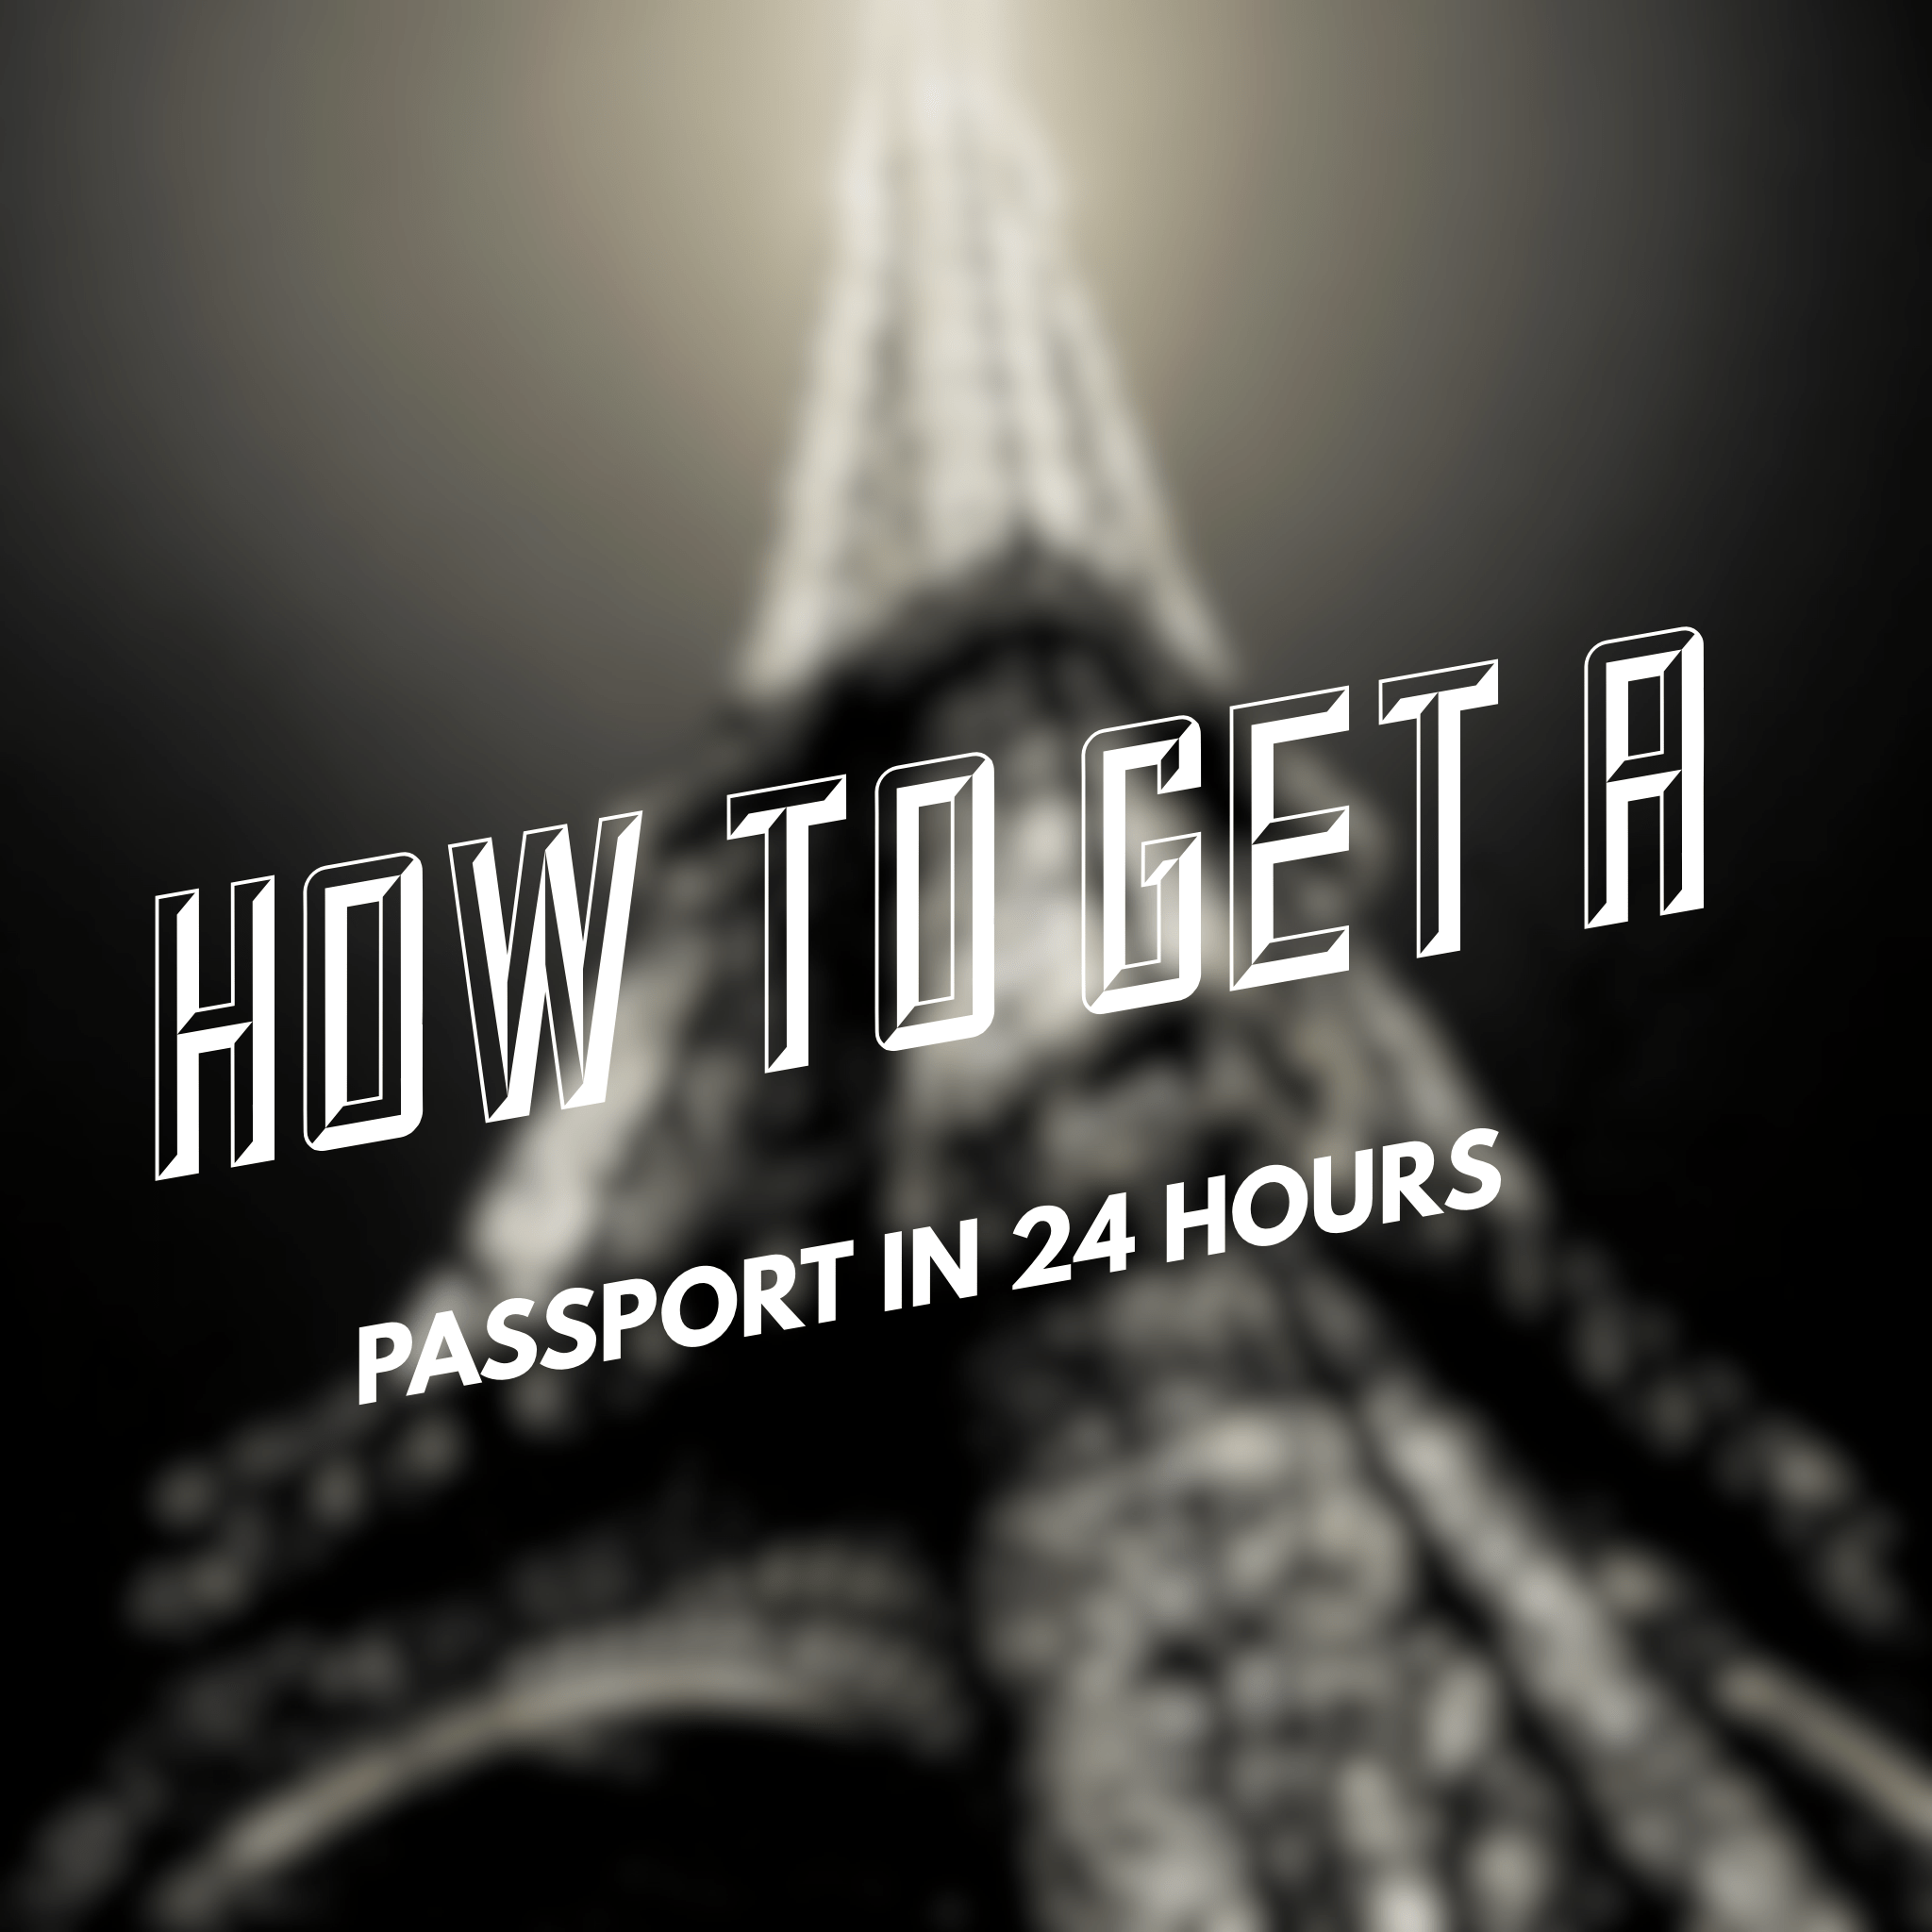 how to get passport same day